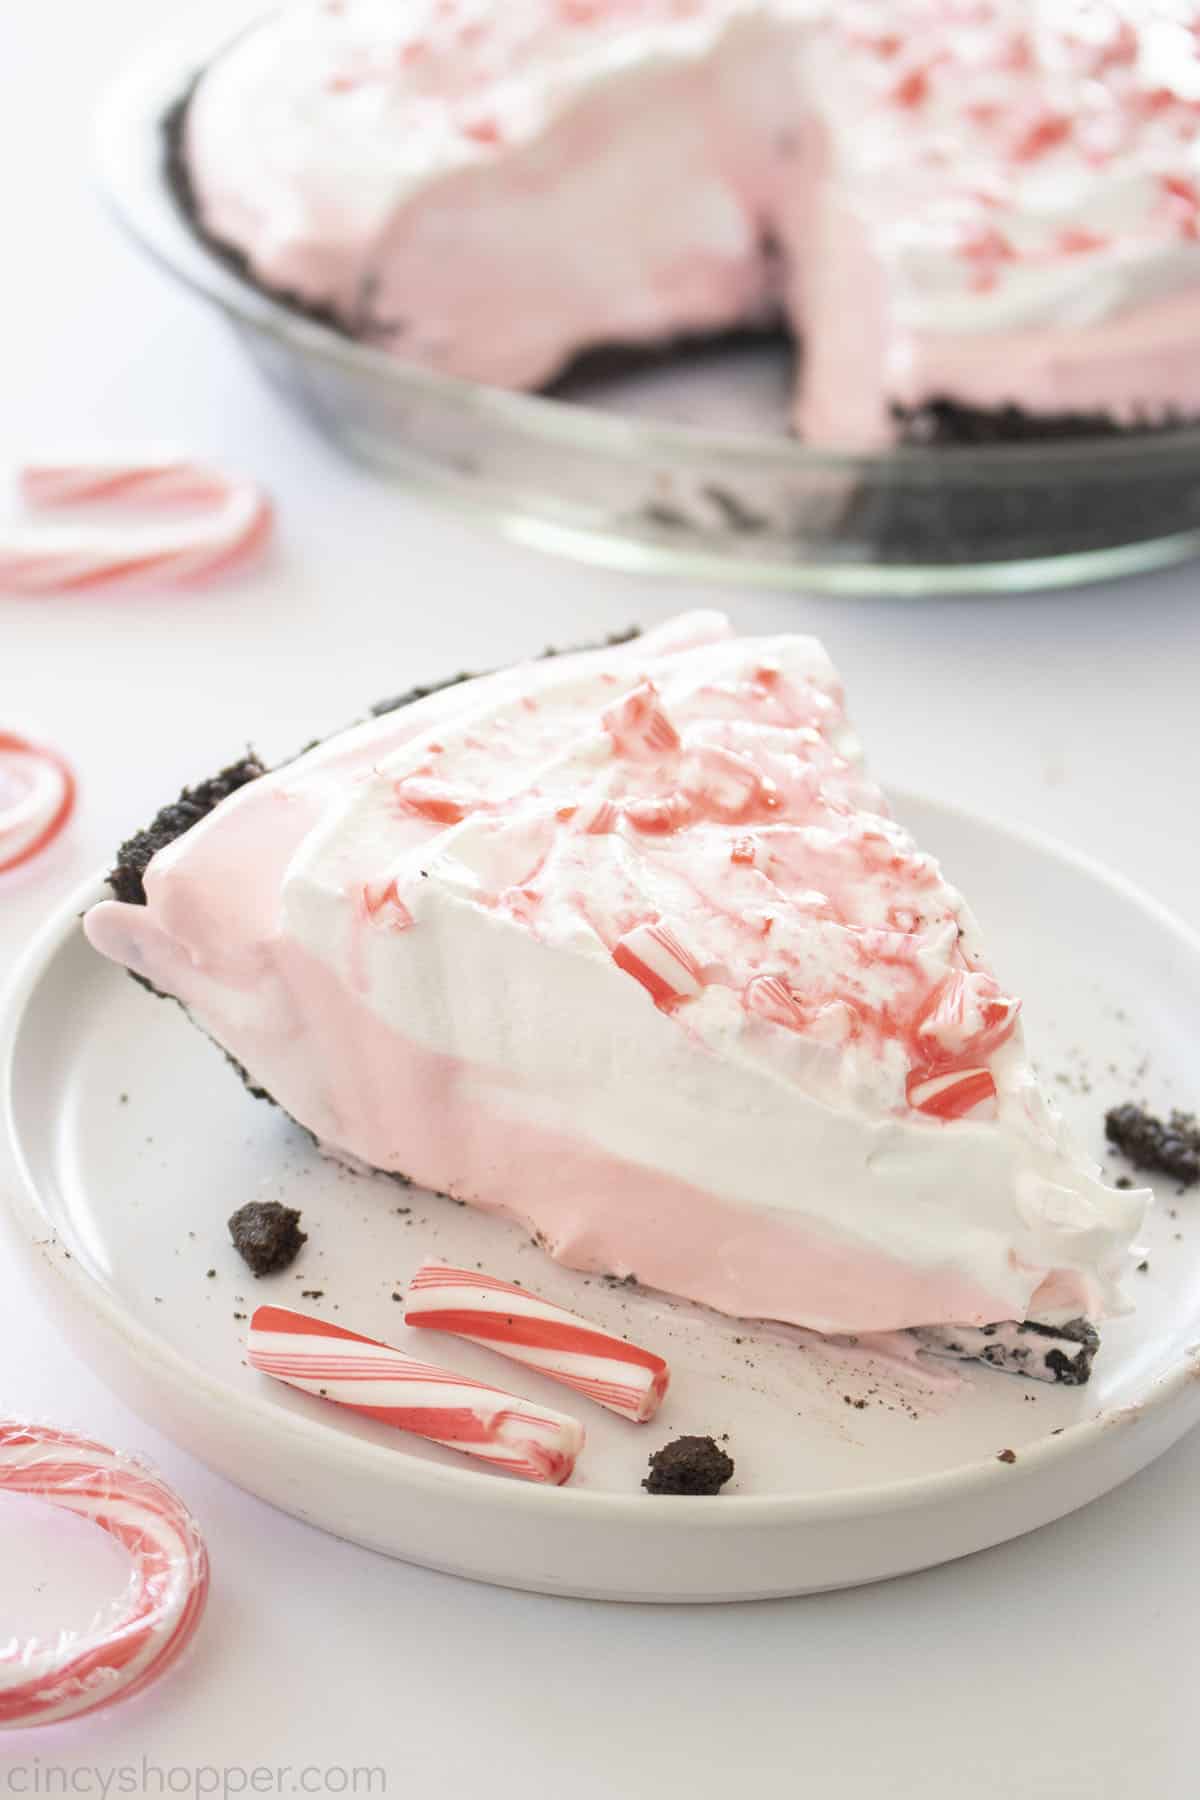 Slice of No Bake Peppermint Pie with Candy Canes.